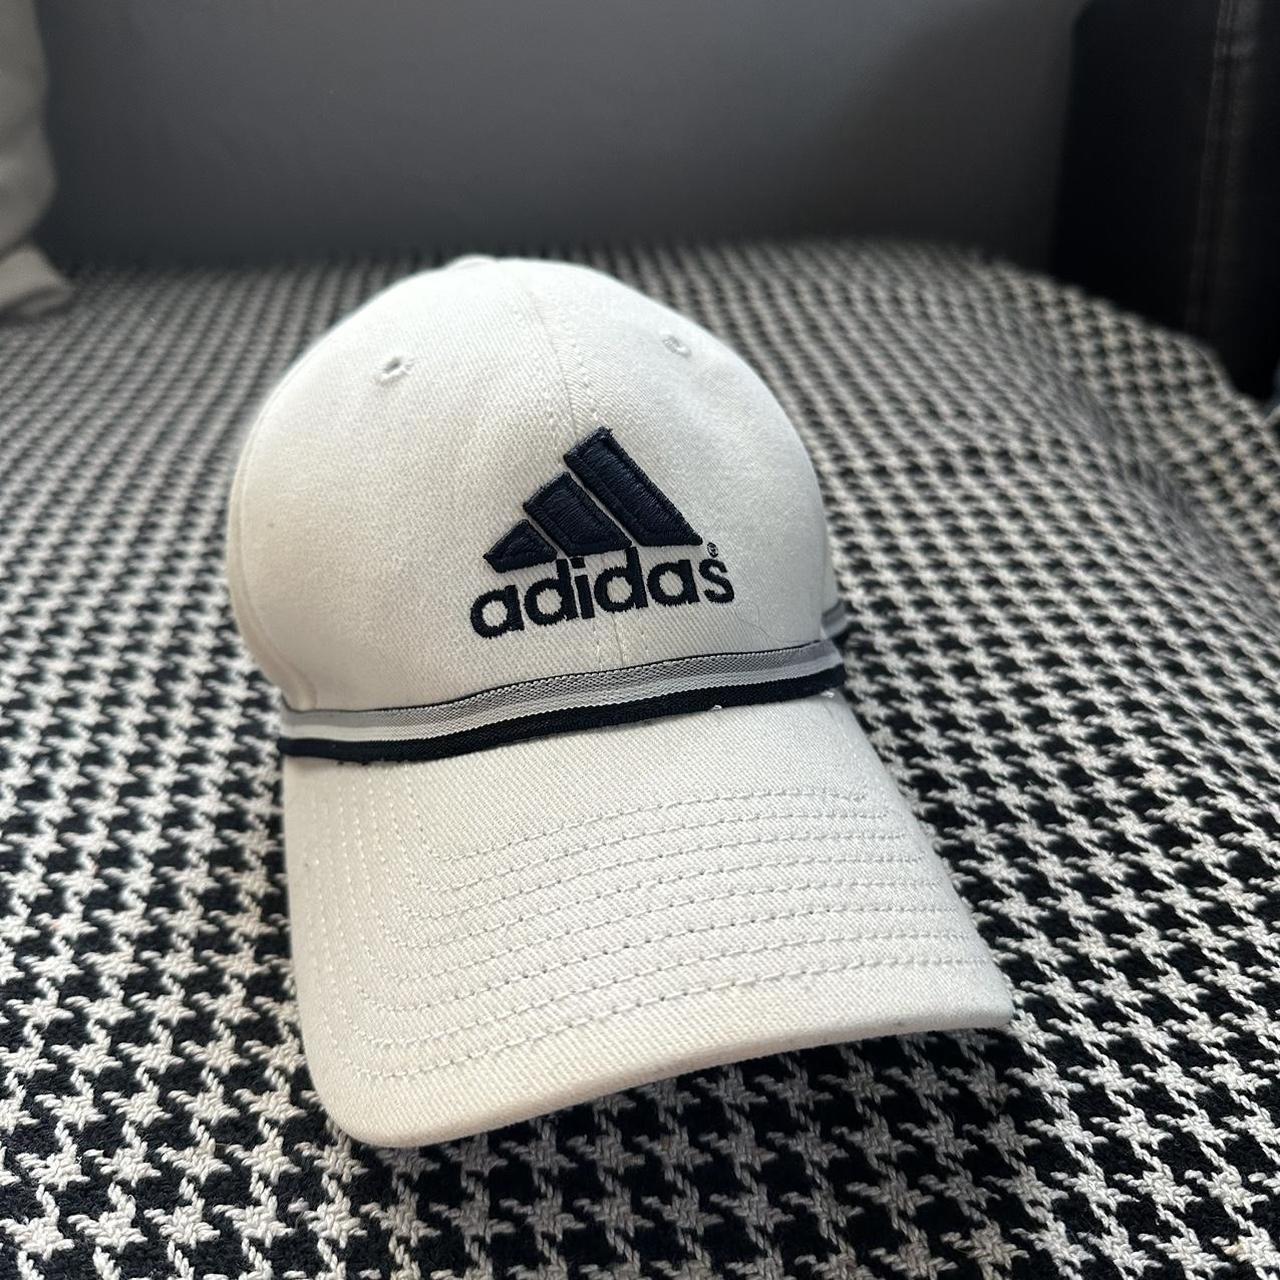 Adidas off white with navy blue accents hat in... - Depop